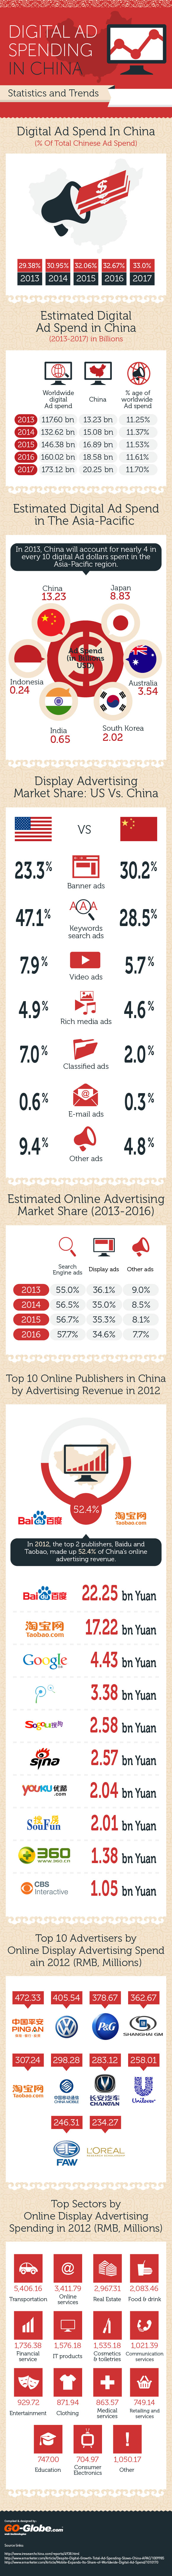 15. Digital Ad spending in China Stats and Trends